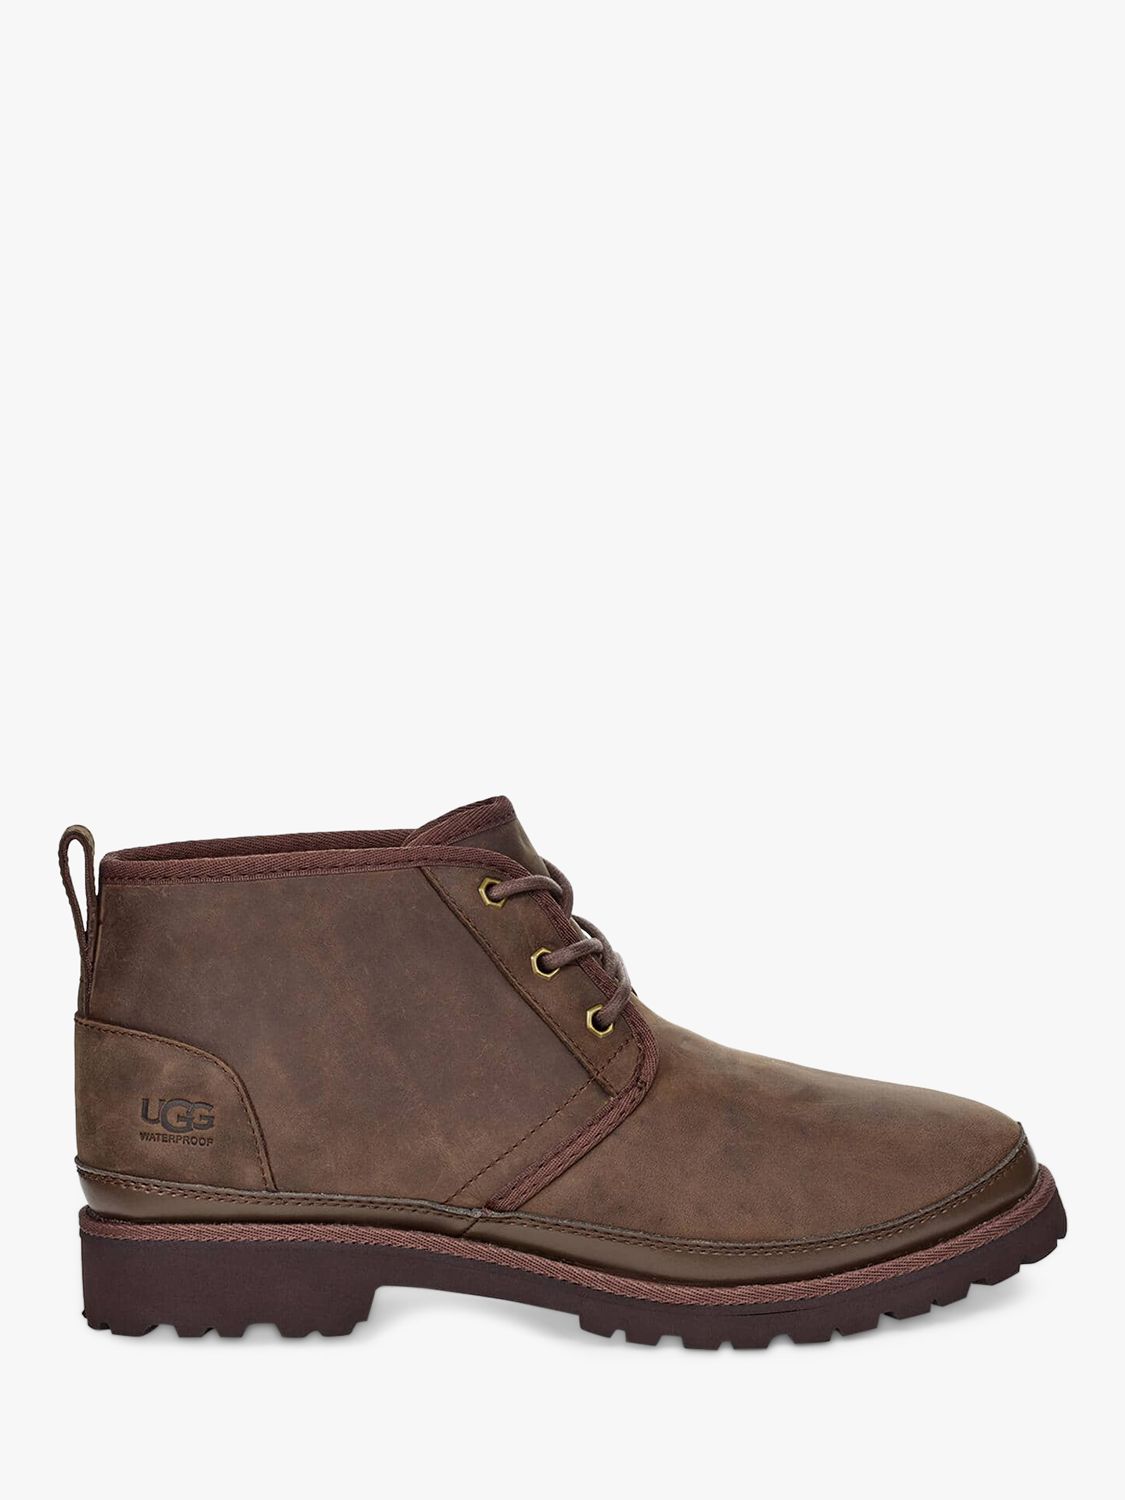 UGG Neuland Wool Lined Leather Boots, Grizzly at John Lewis & Partners